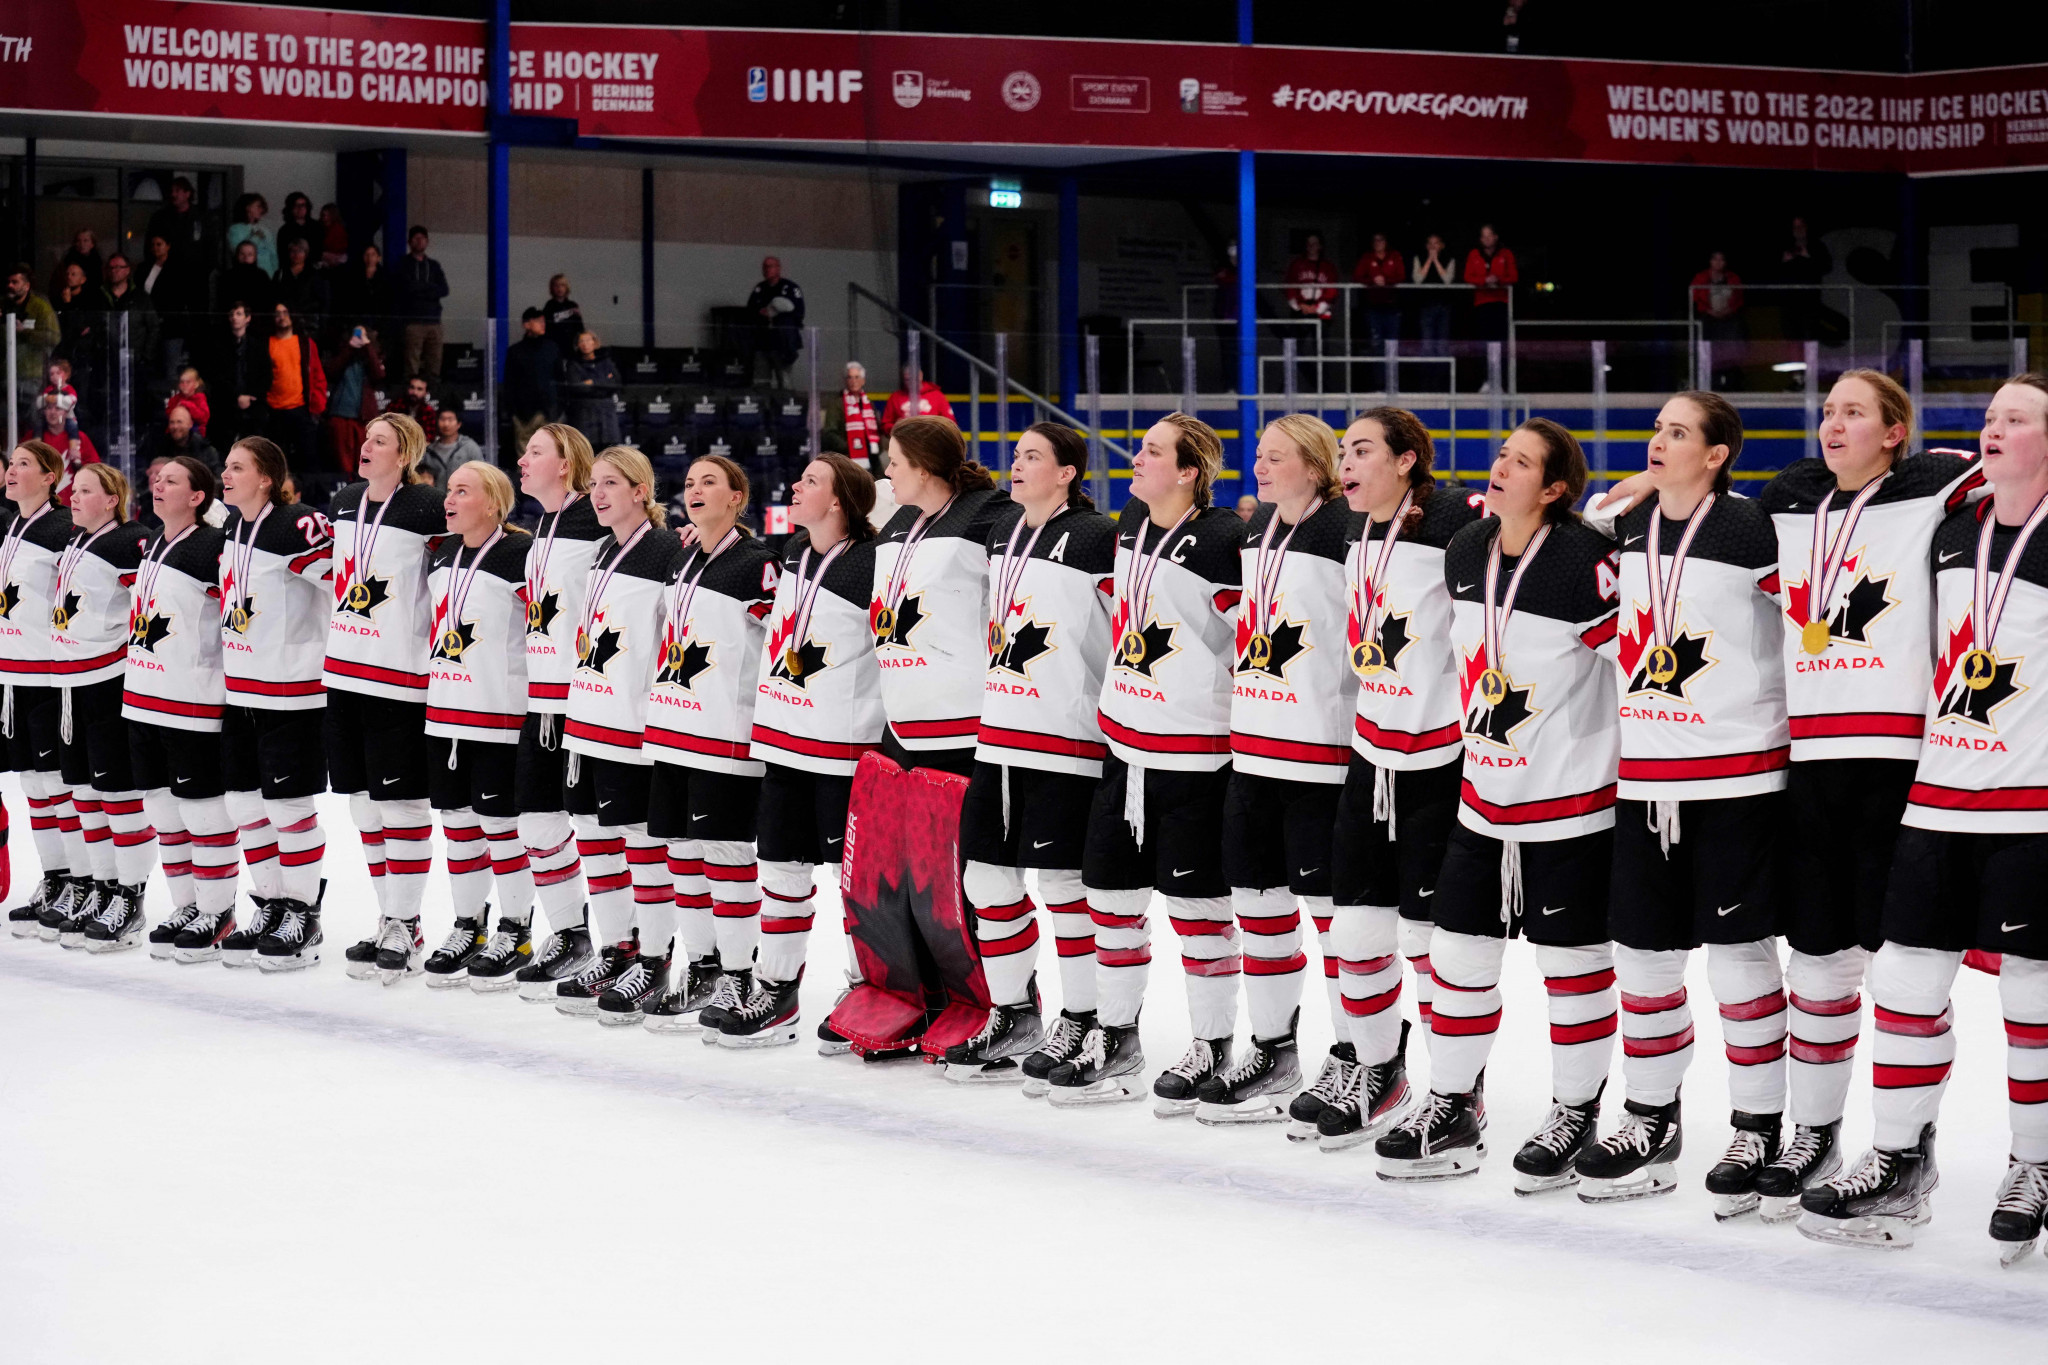 Reigning Olympic champions Canada have won the last two IIHF Women's World Championships ©Getty Images